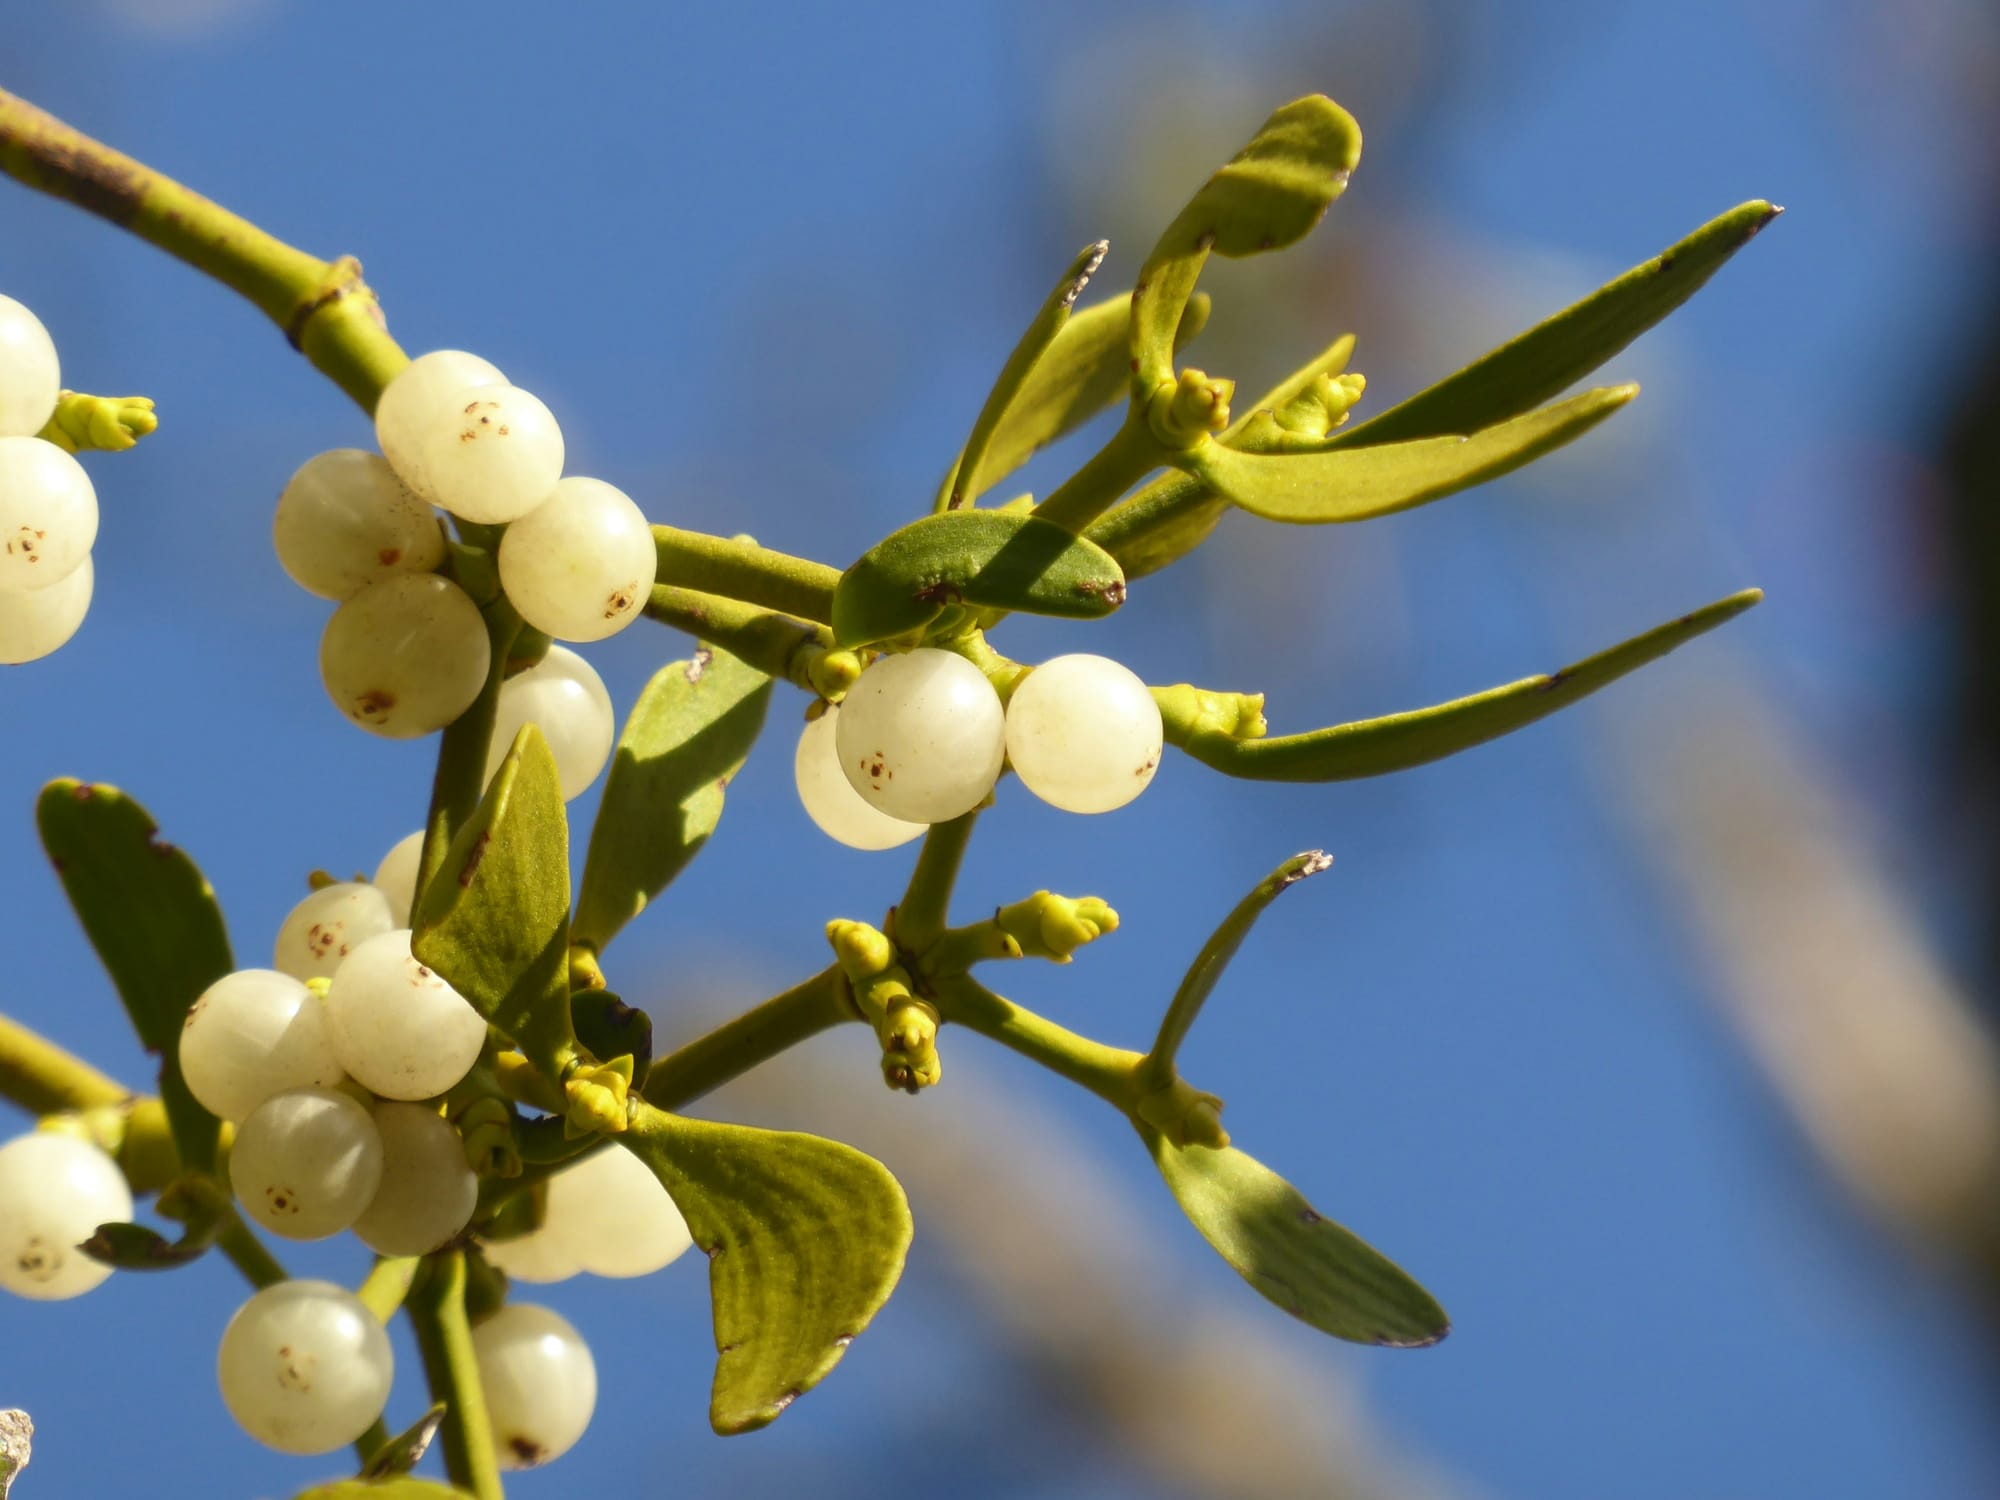 A yellowish-green sprig of mistletoe with cloudy white berries.